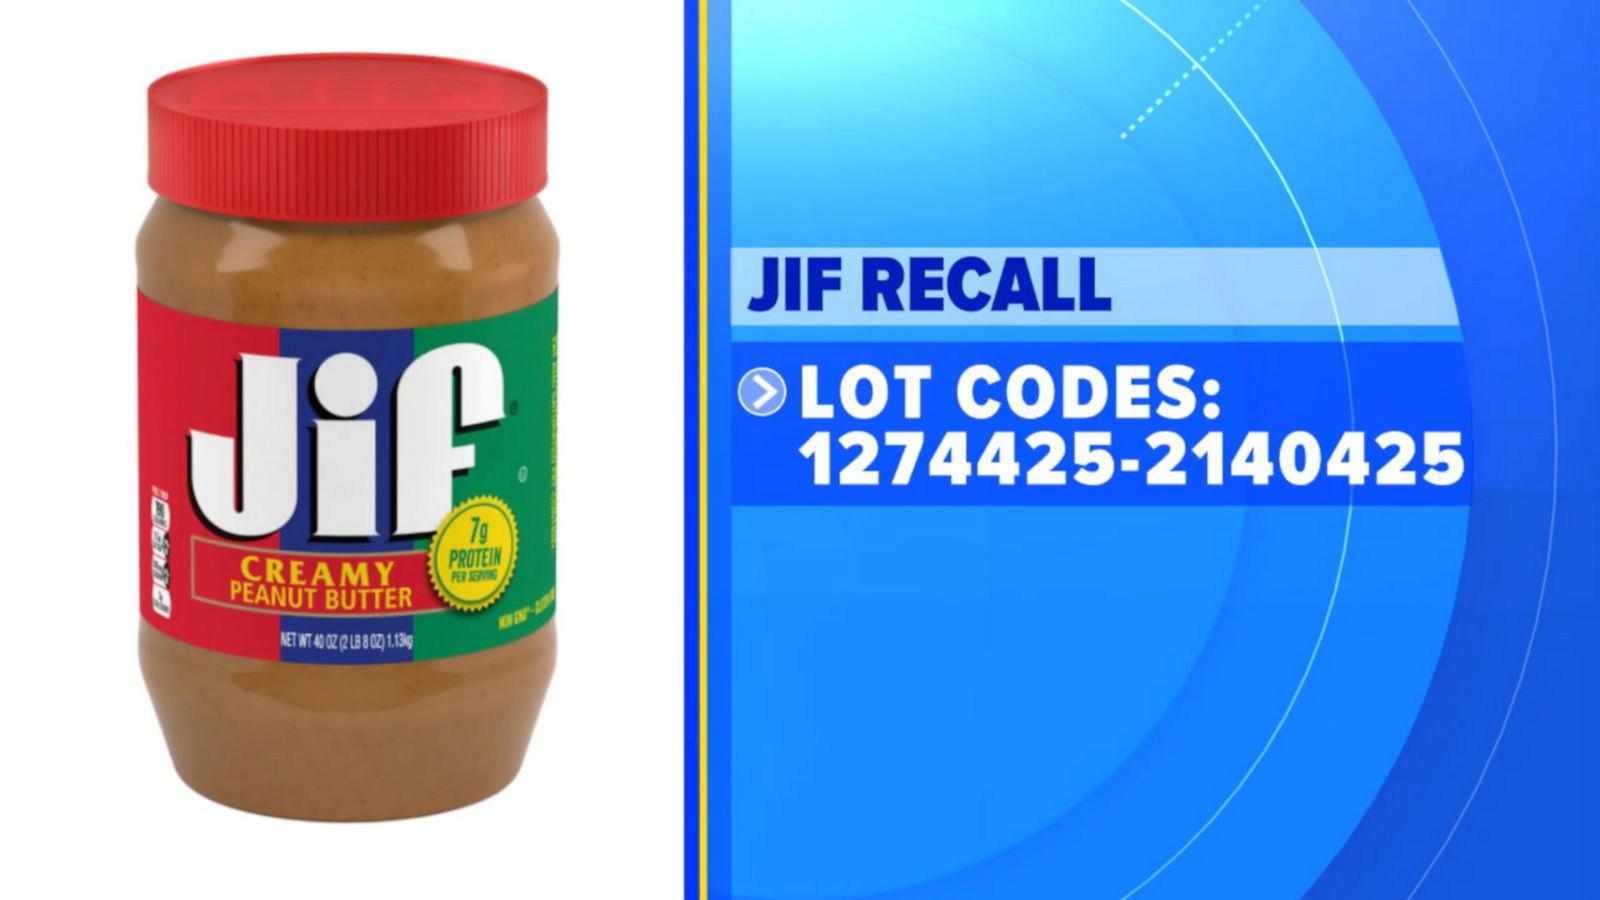 Jif peanut butter recalled over salmonella concerns Good Morning America